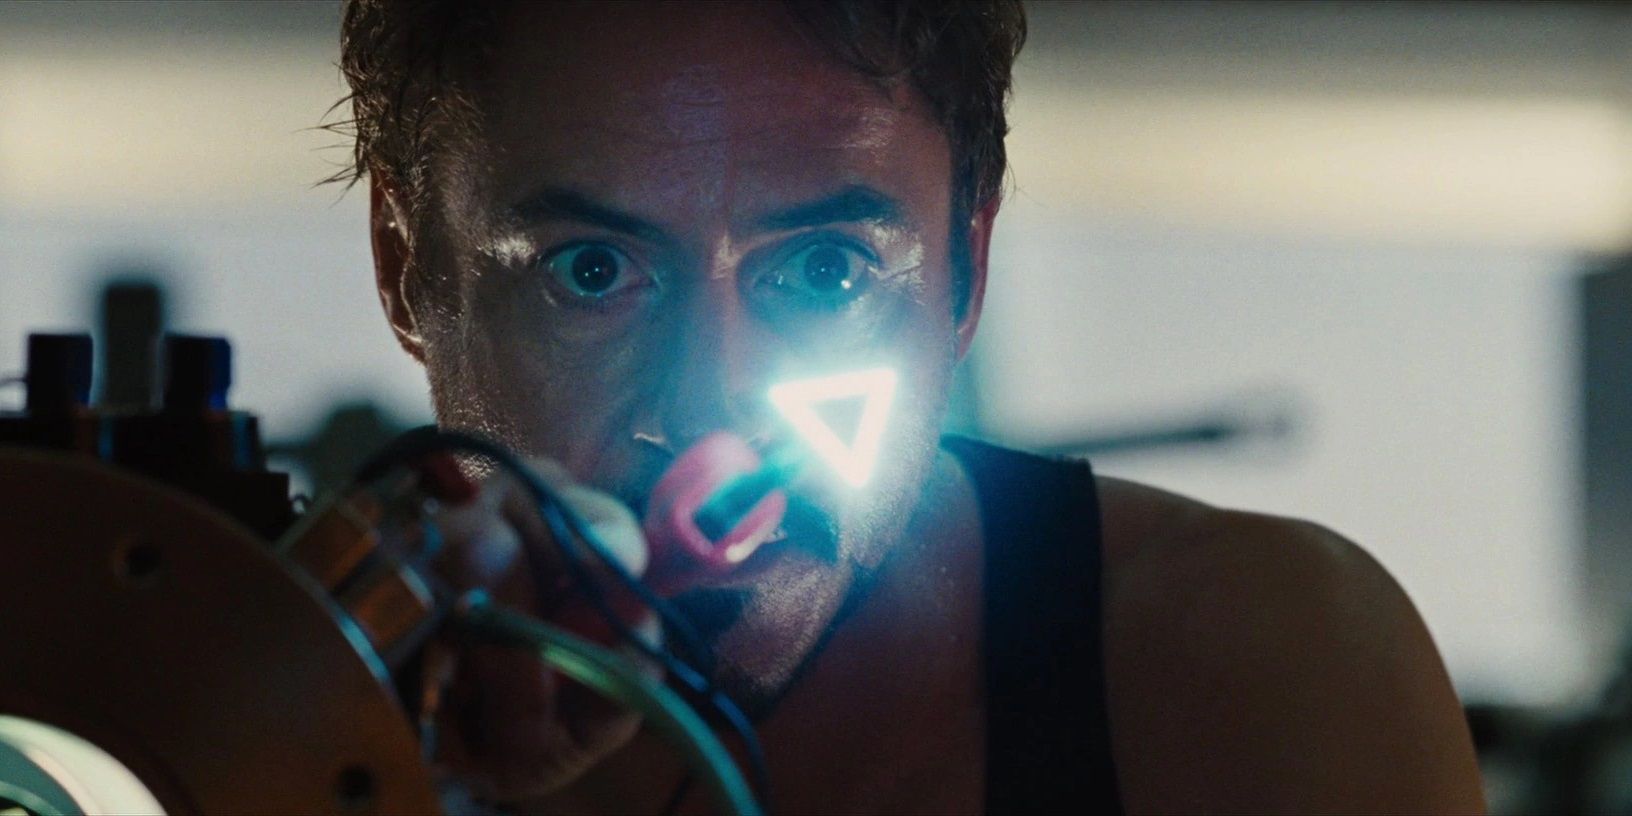 Tony Stark invents a new element in Iron Man 2